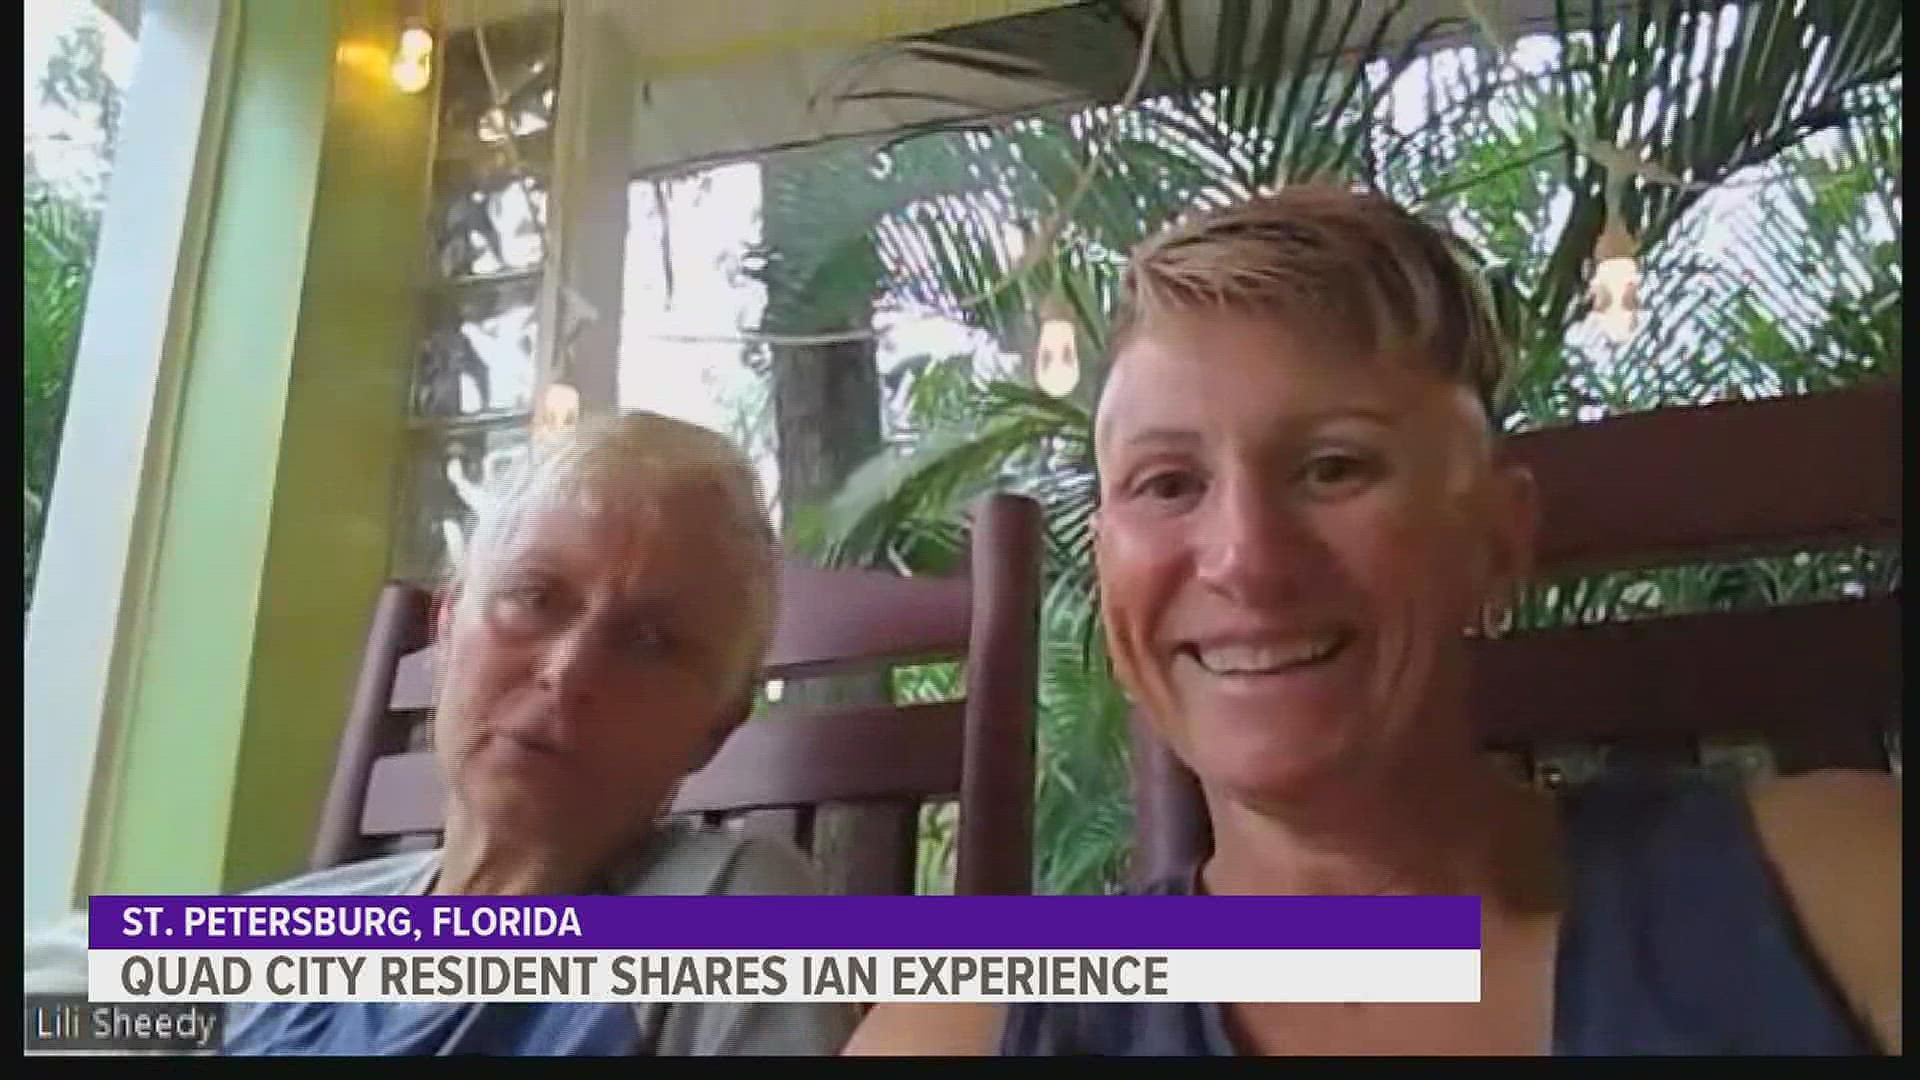 Lili Sheedy shares her experience with preparation for Hurricane Ian's arrival